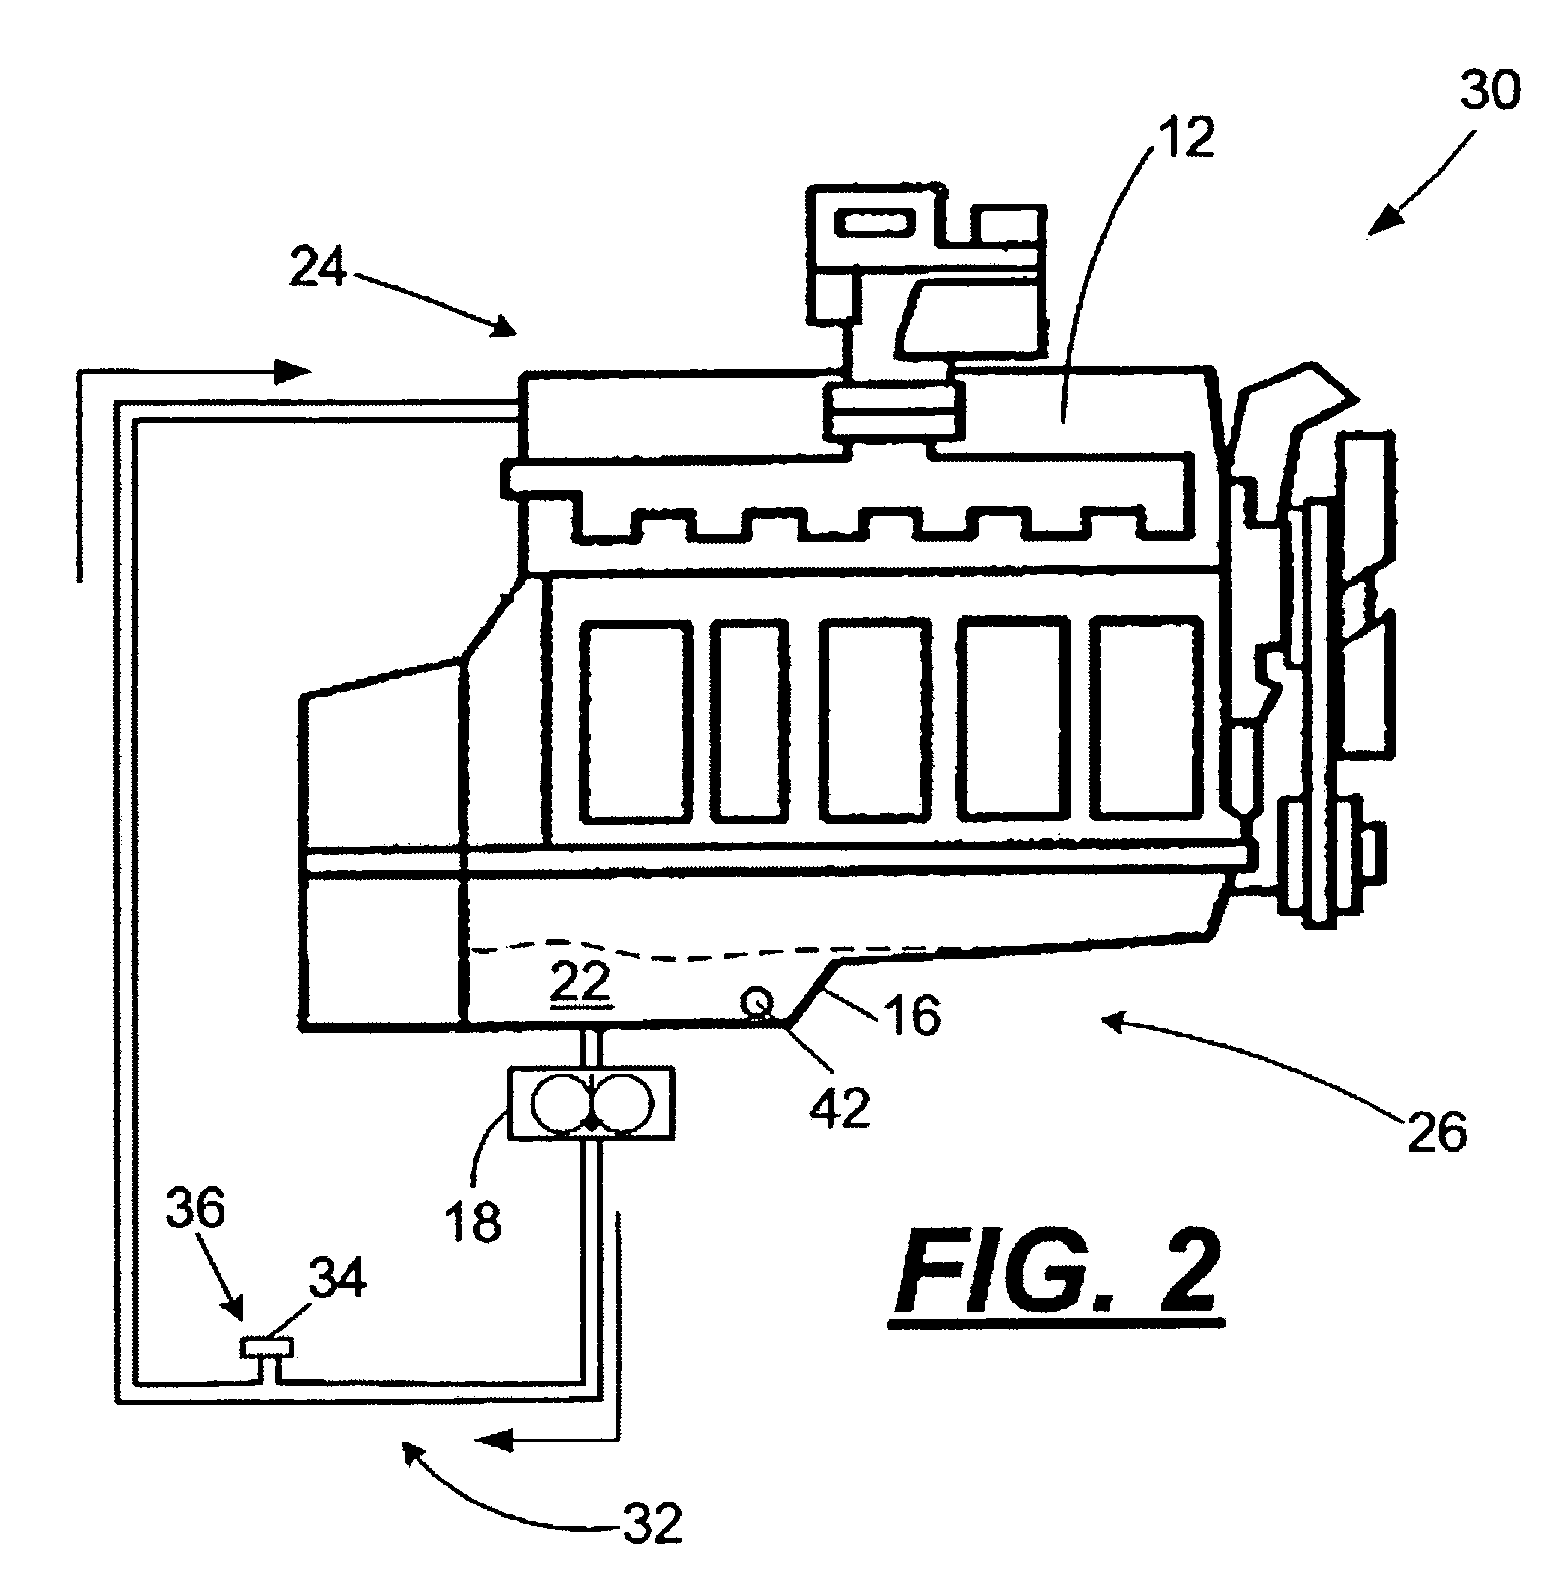 Filterless crankcase lubrication system for a vehicle